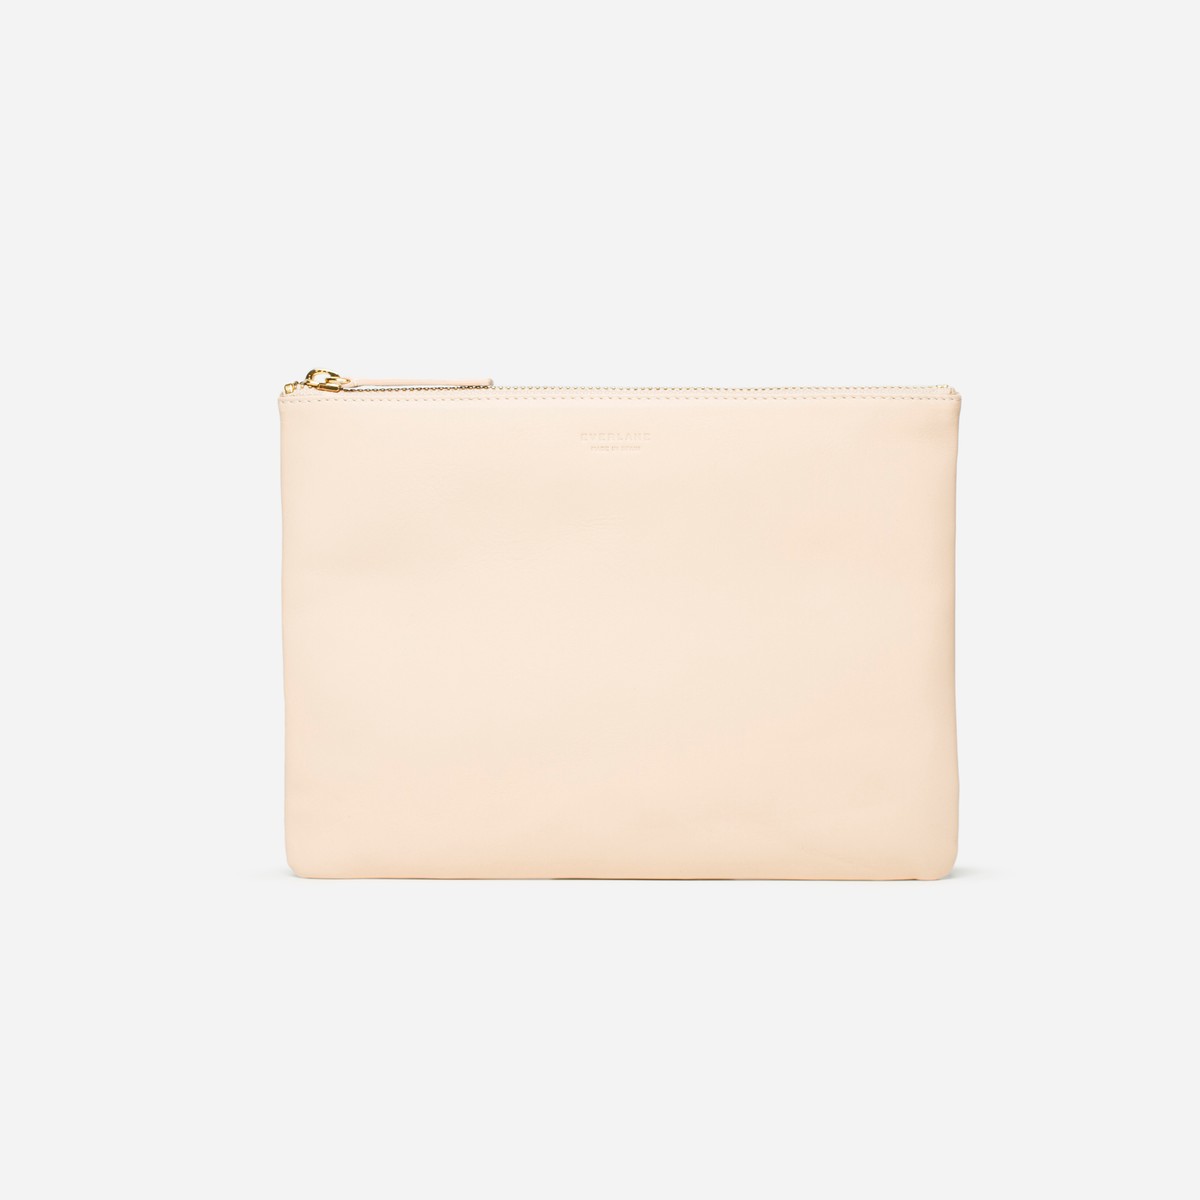 everlane-leather-pouch-8